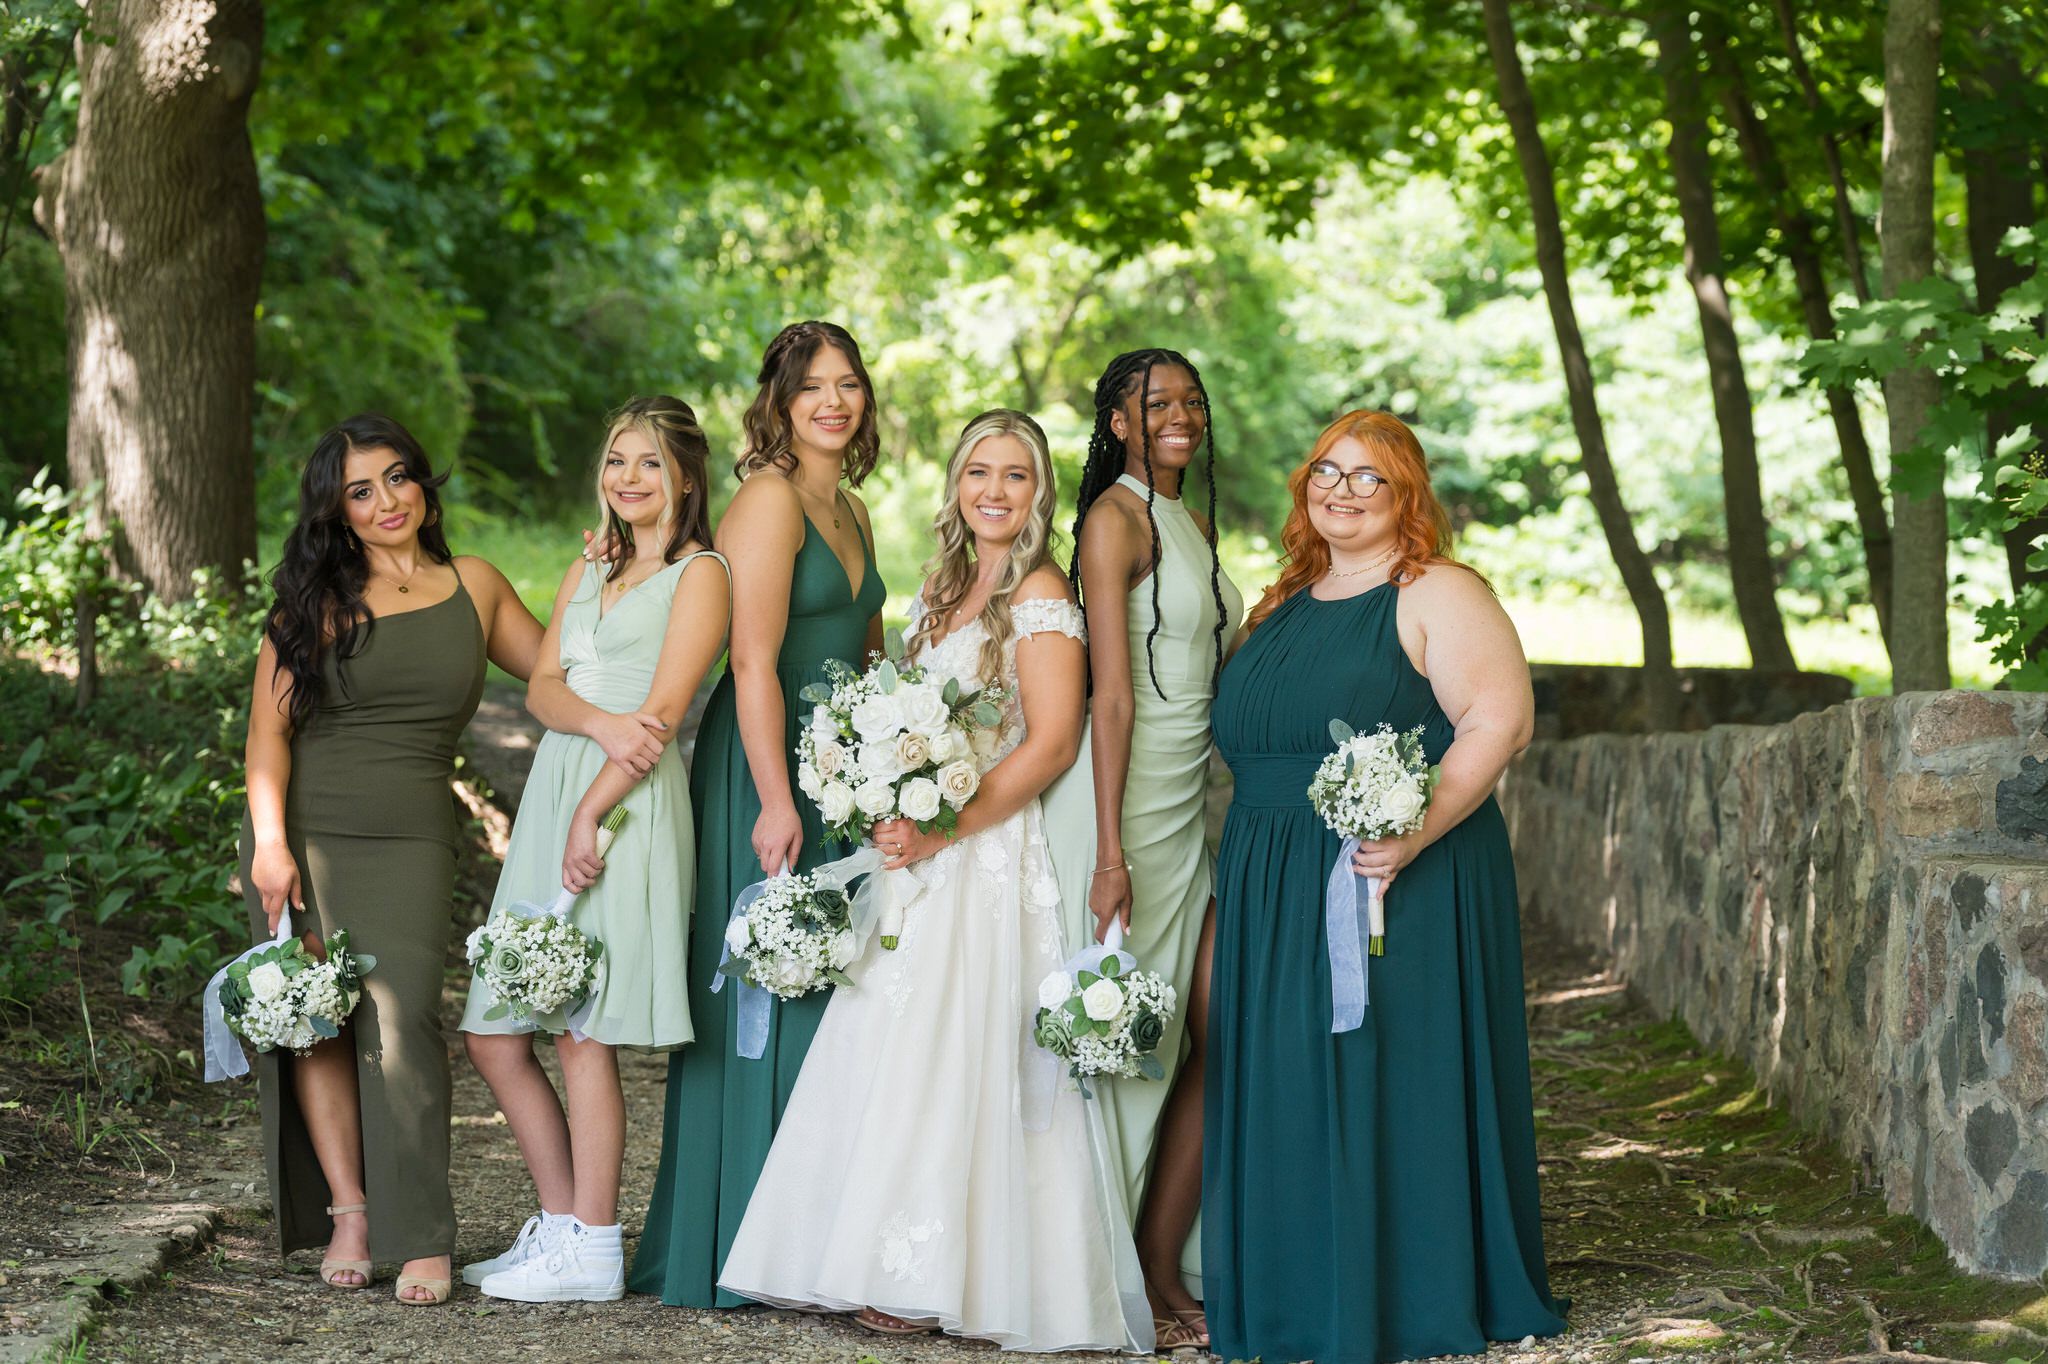 Bridesmaids pose for a photo at a Stony Creek wedding in Shelby Township, MI